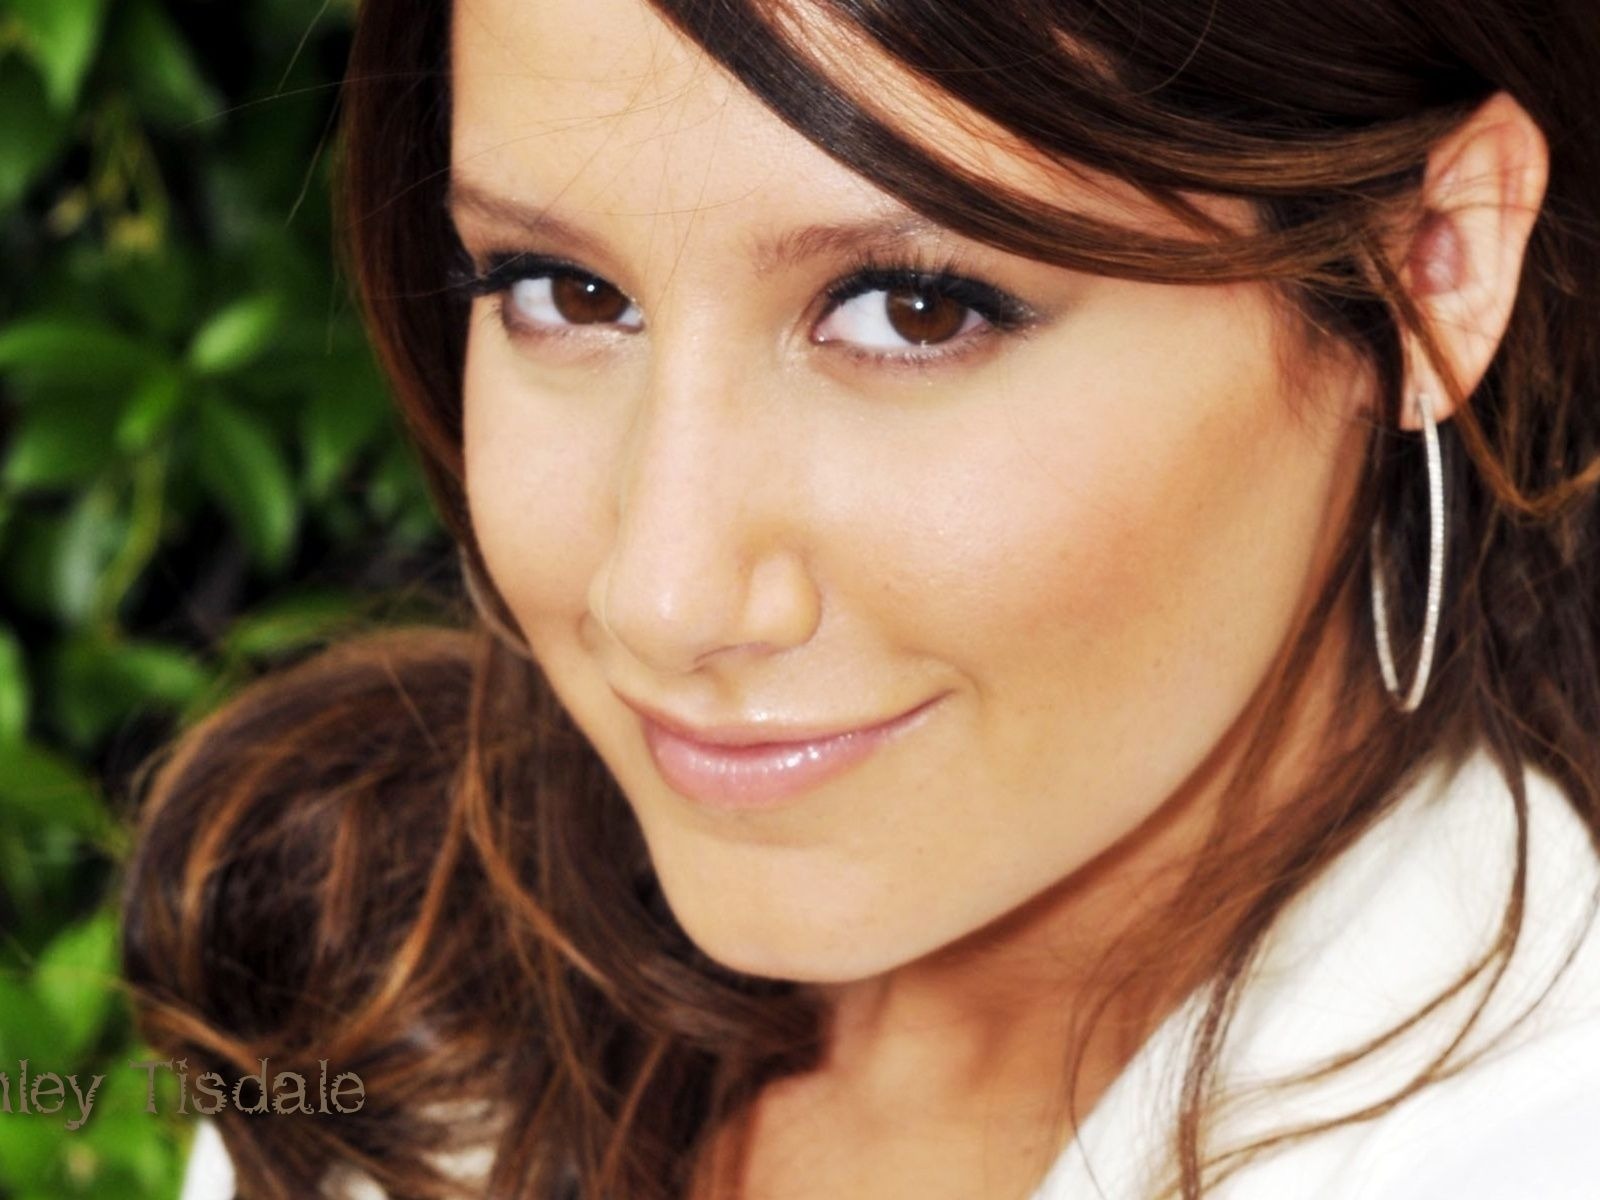 Ashley Tisdale #042 - 1600x1200 Wallpapers Pictures Photos Images